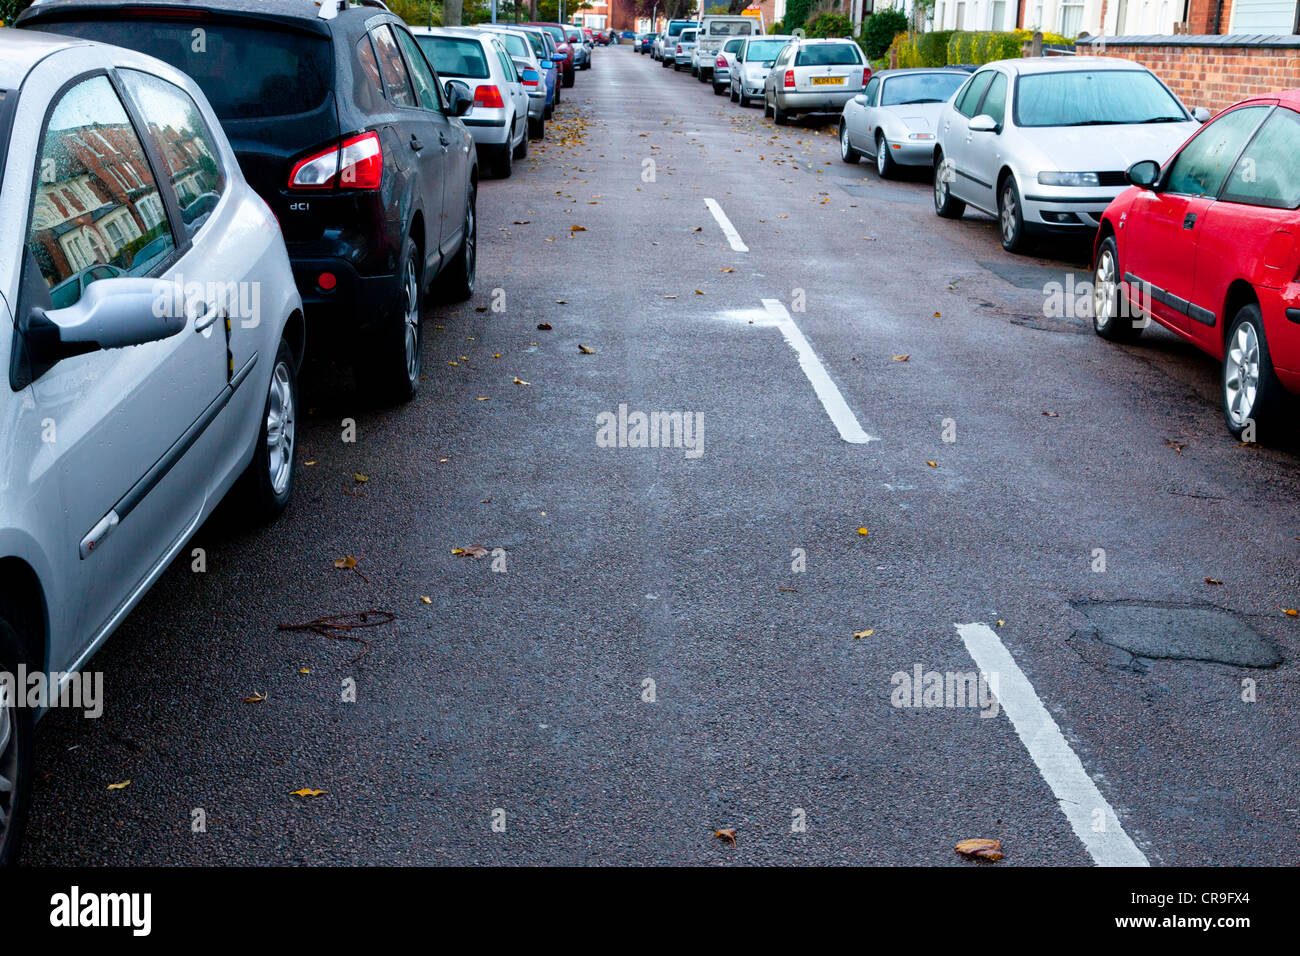 On street parking. Cars parked along both sides of the road, West Bridgford, Nottinghamshire, England, UK Stock Photo